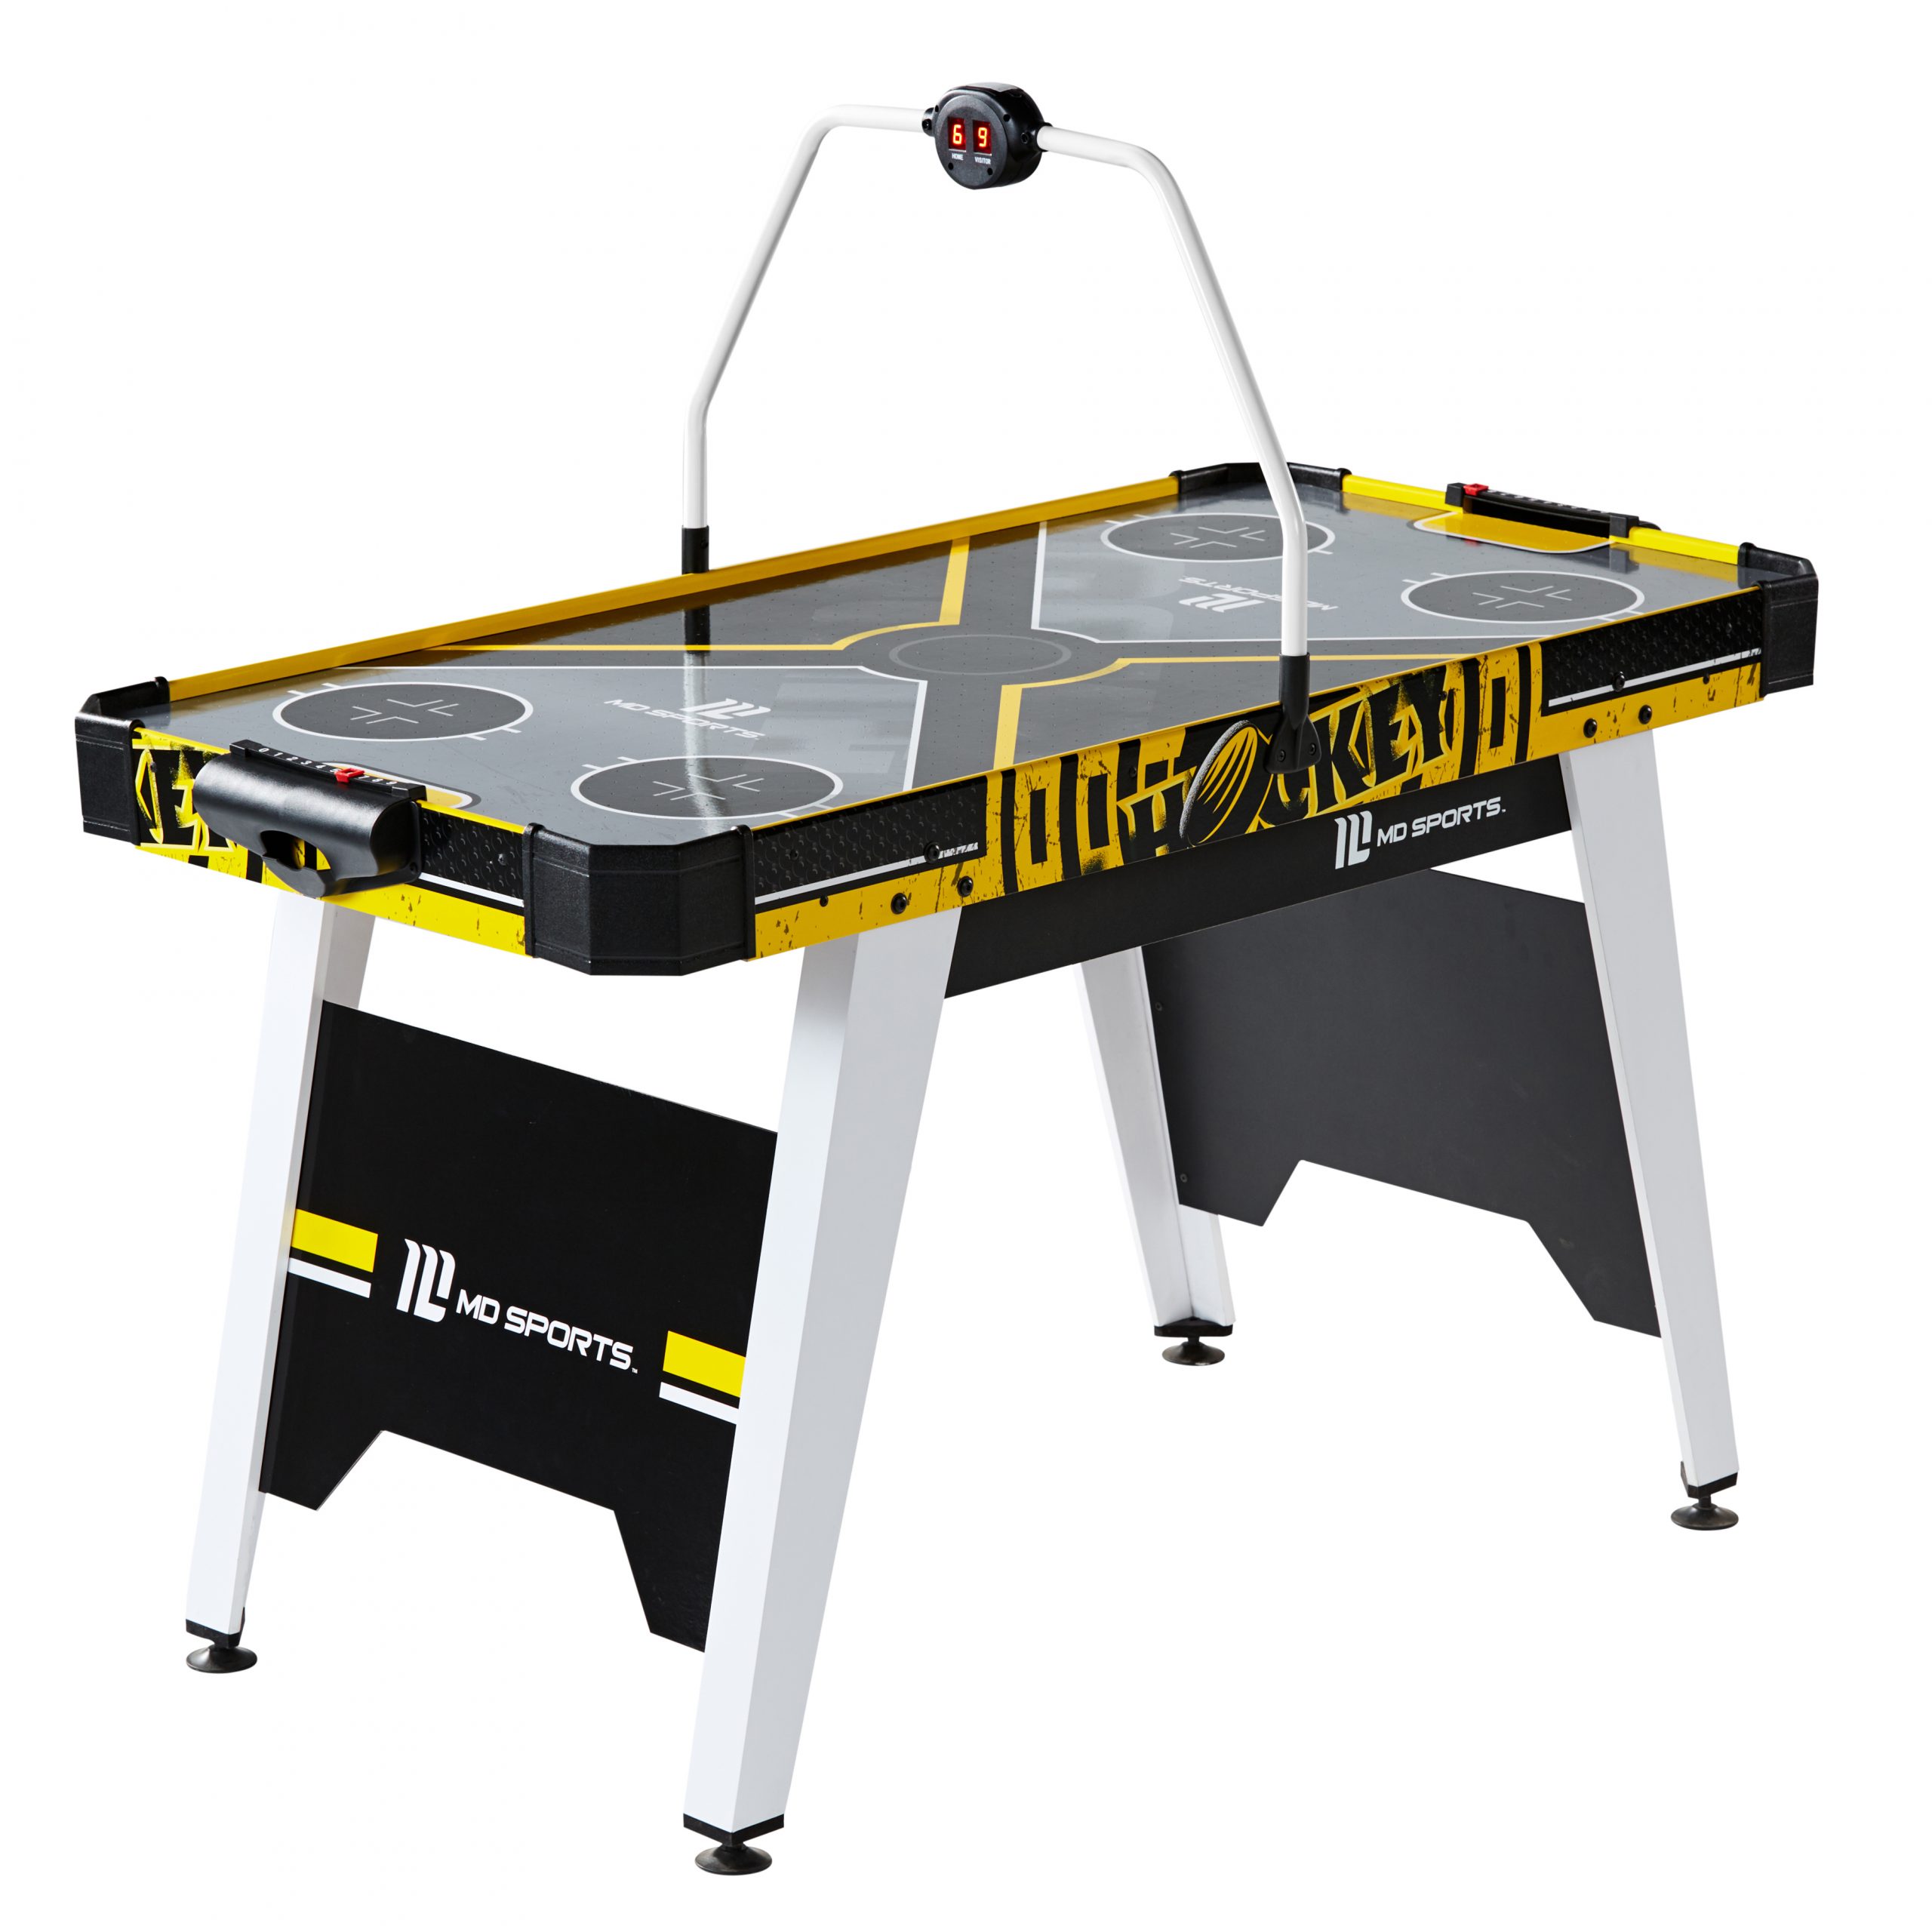 54 Inch Air Hockey Table - Finding Fun At Home